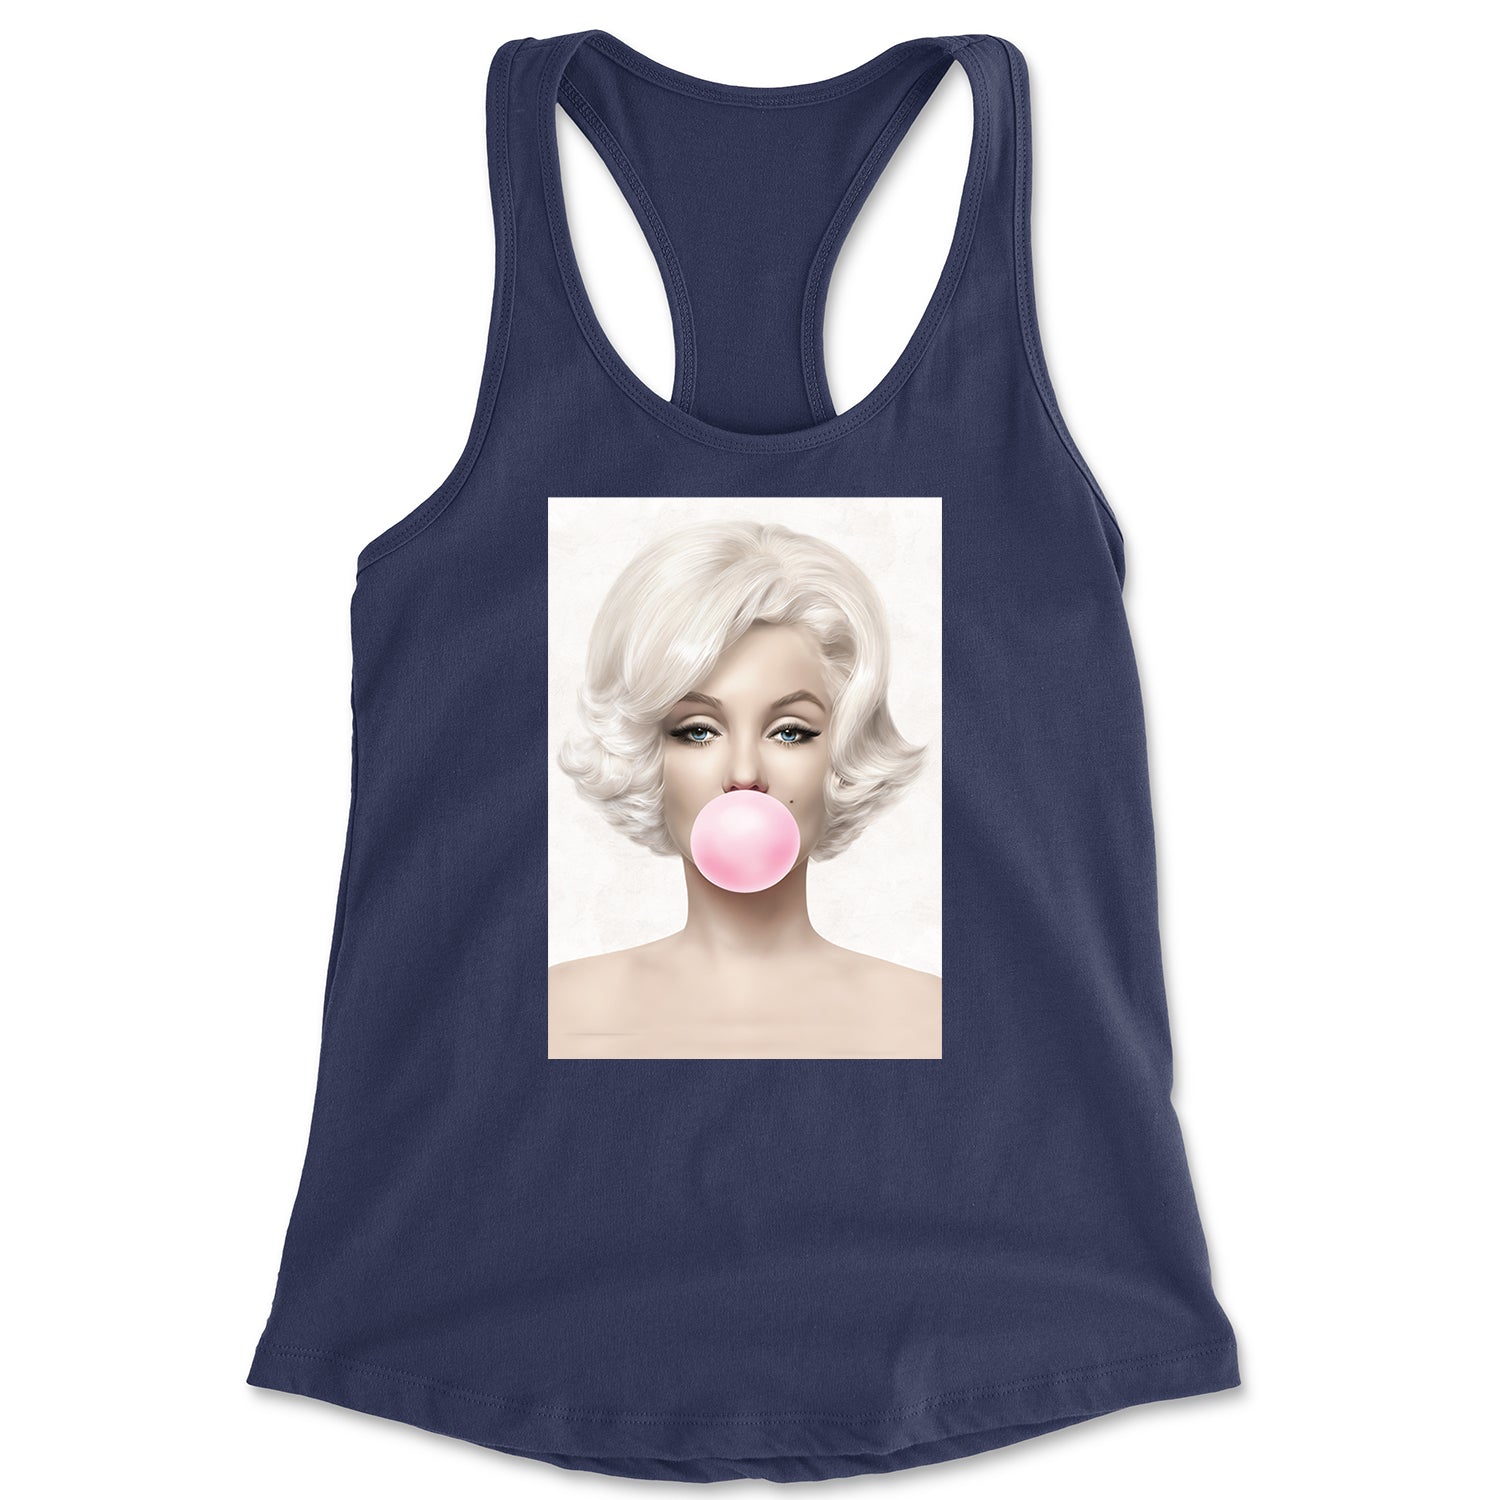 Marilyn Monroe Pink Bubble Gum Racerback Tank Top for Women marilyn, monroe by Expression Tees